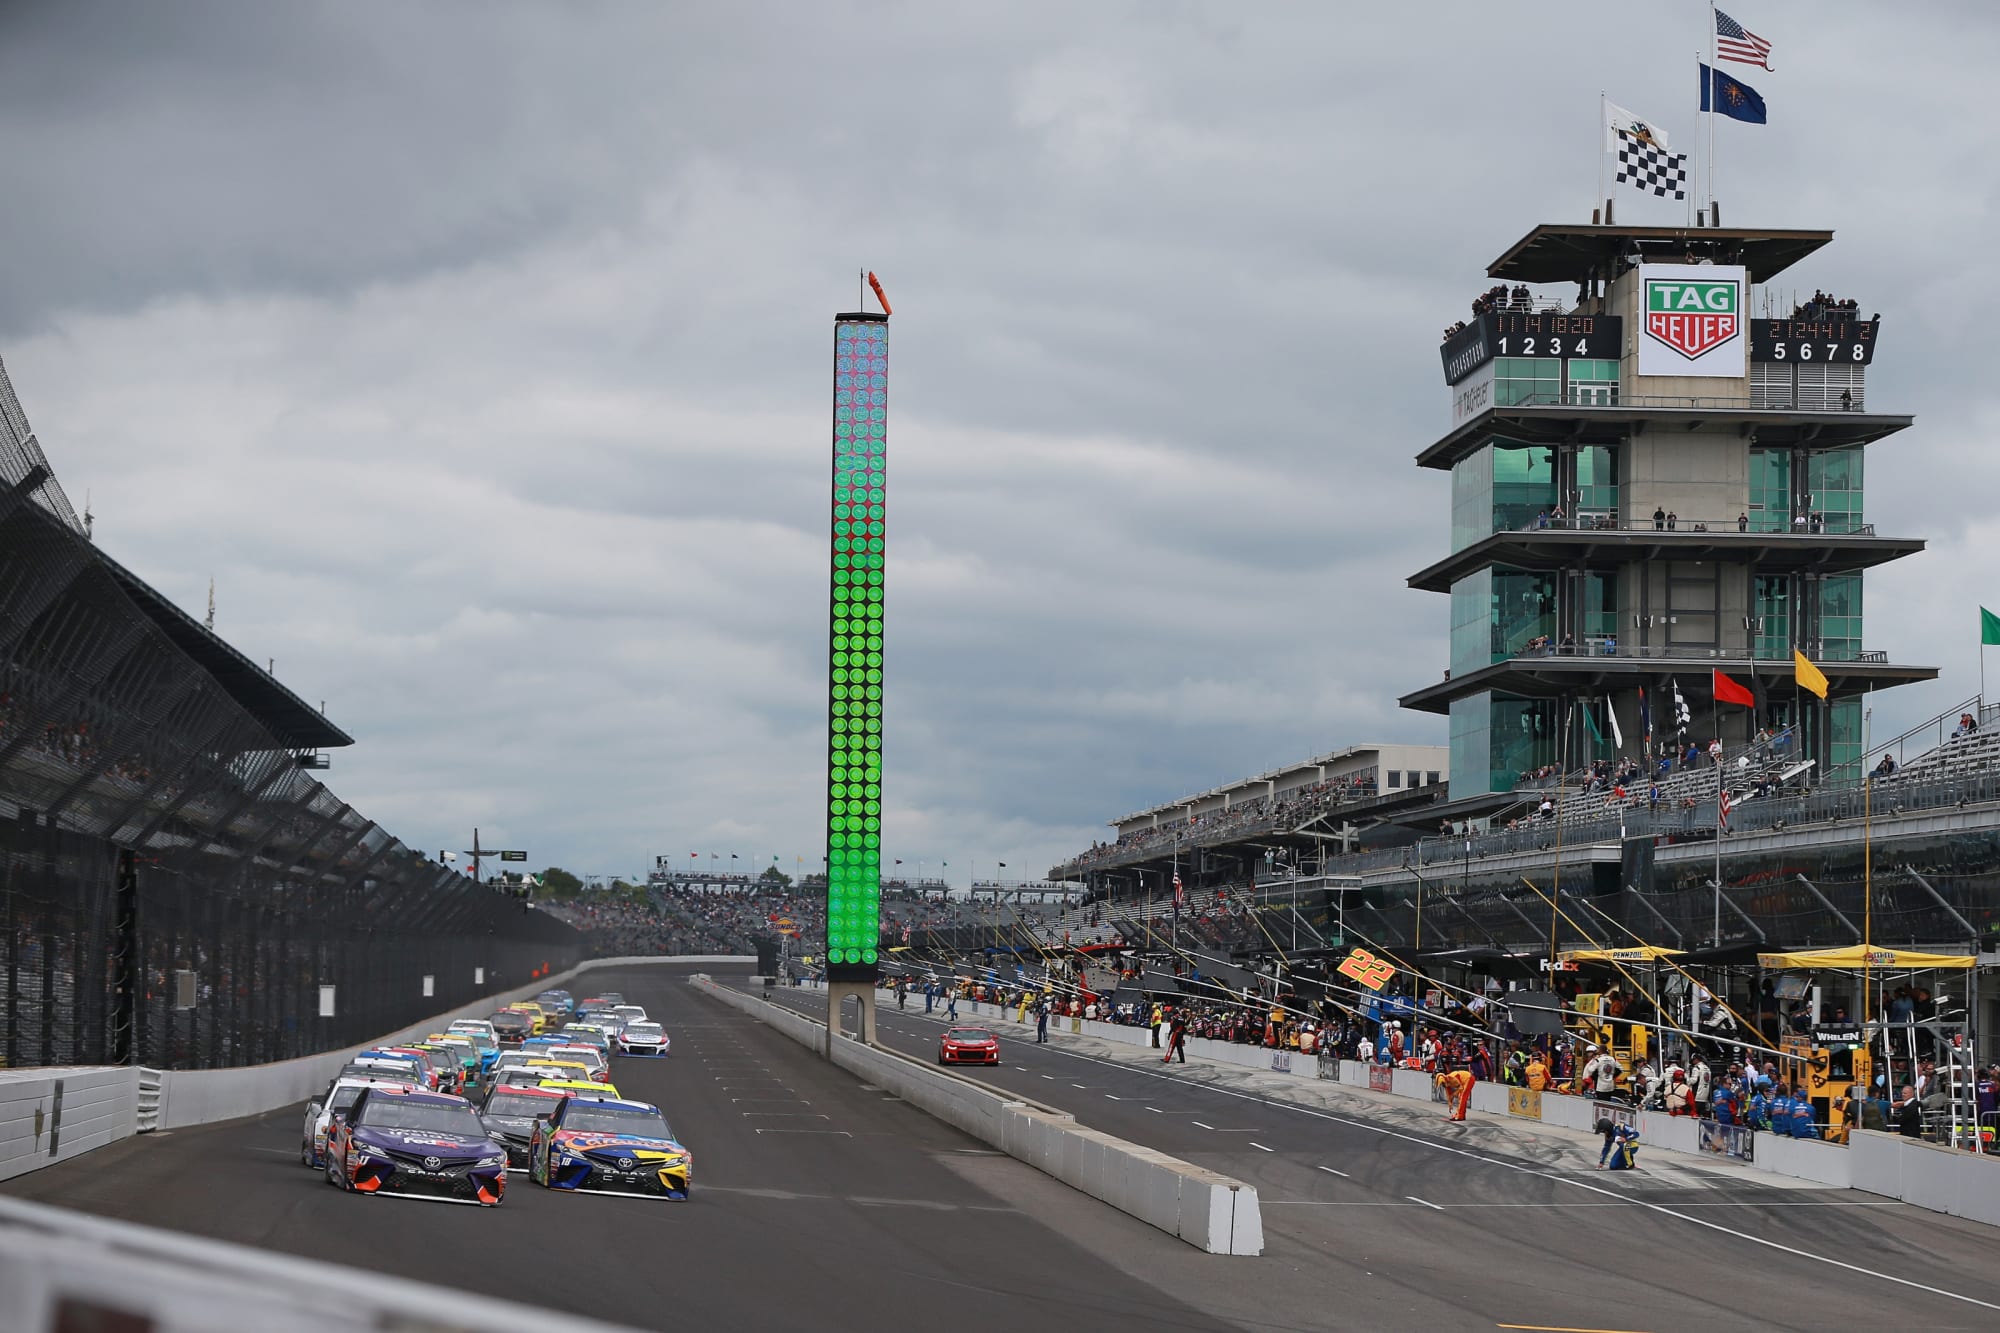 NASCAR has an embarrassment to Indianapolis Motor Speedway